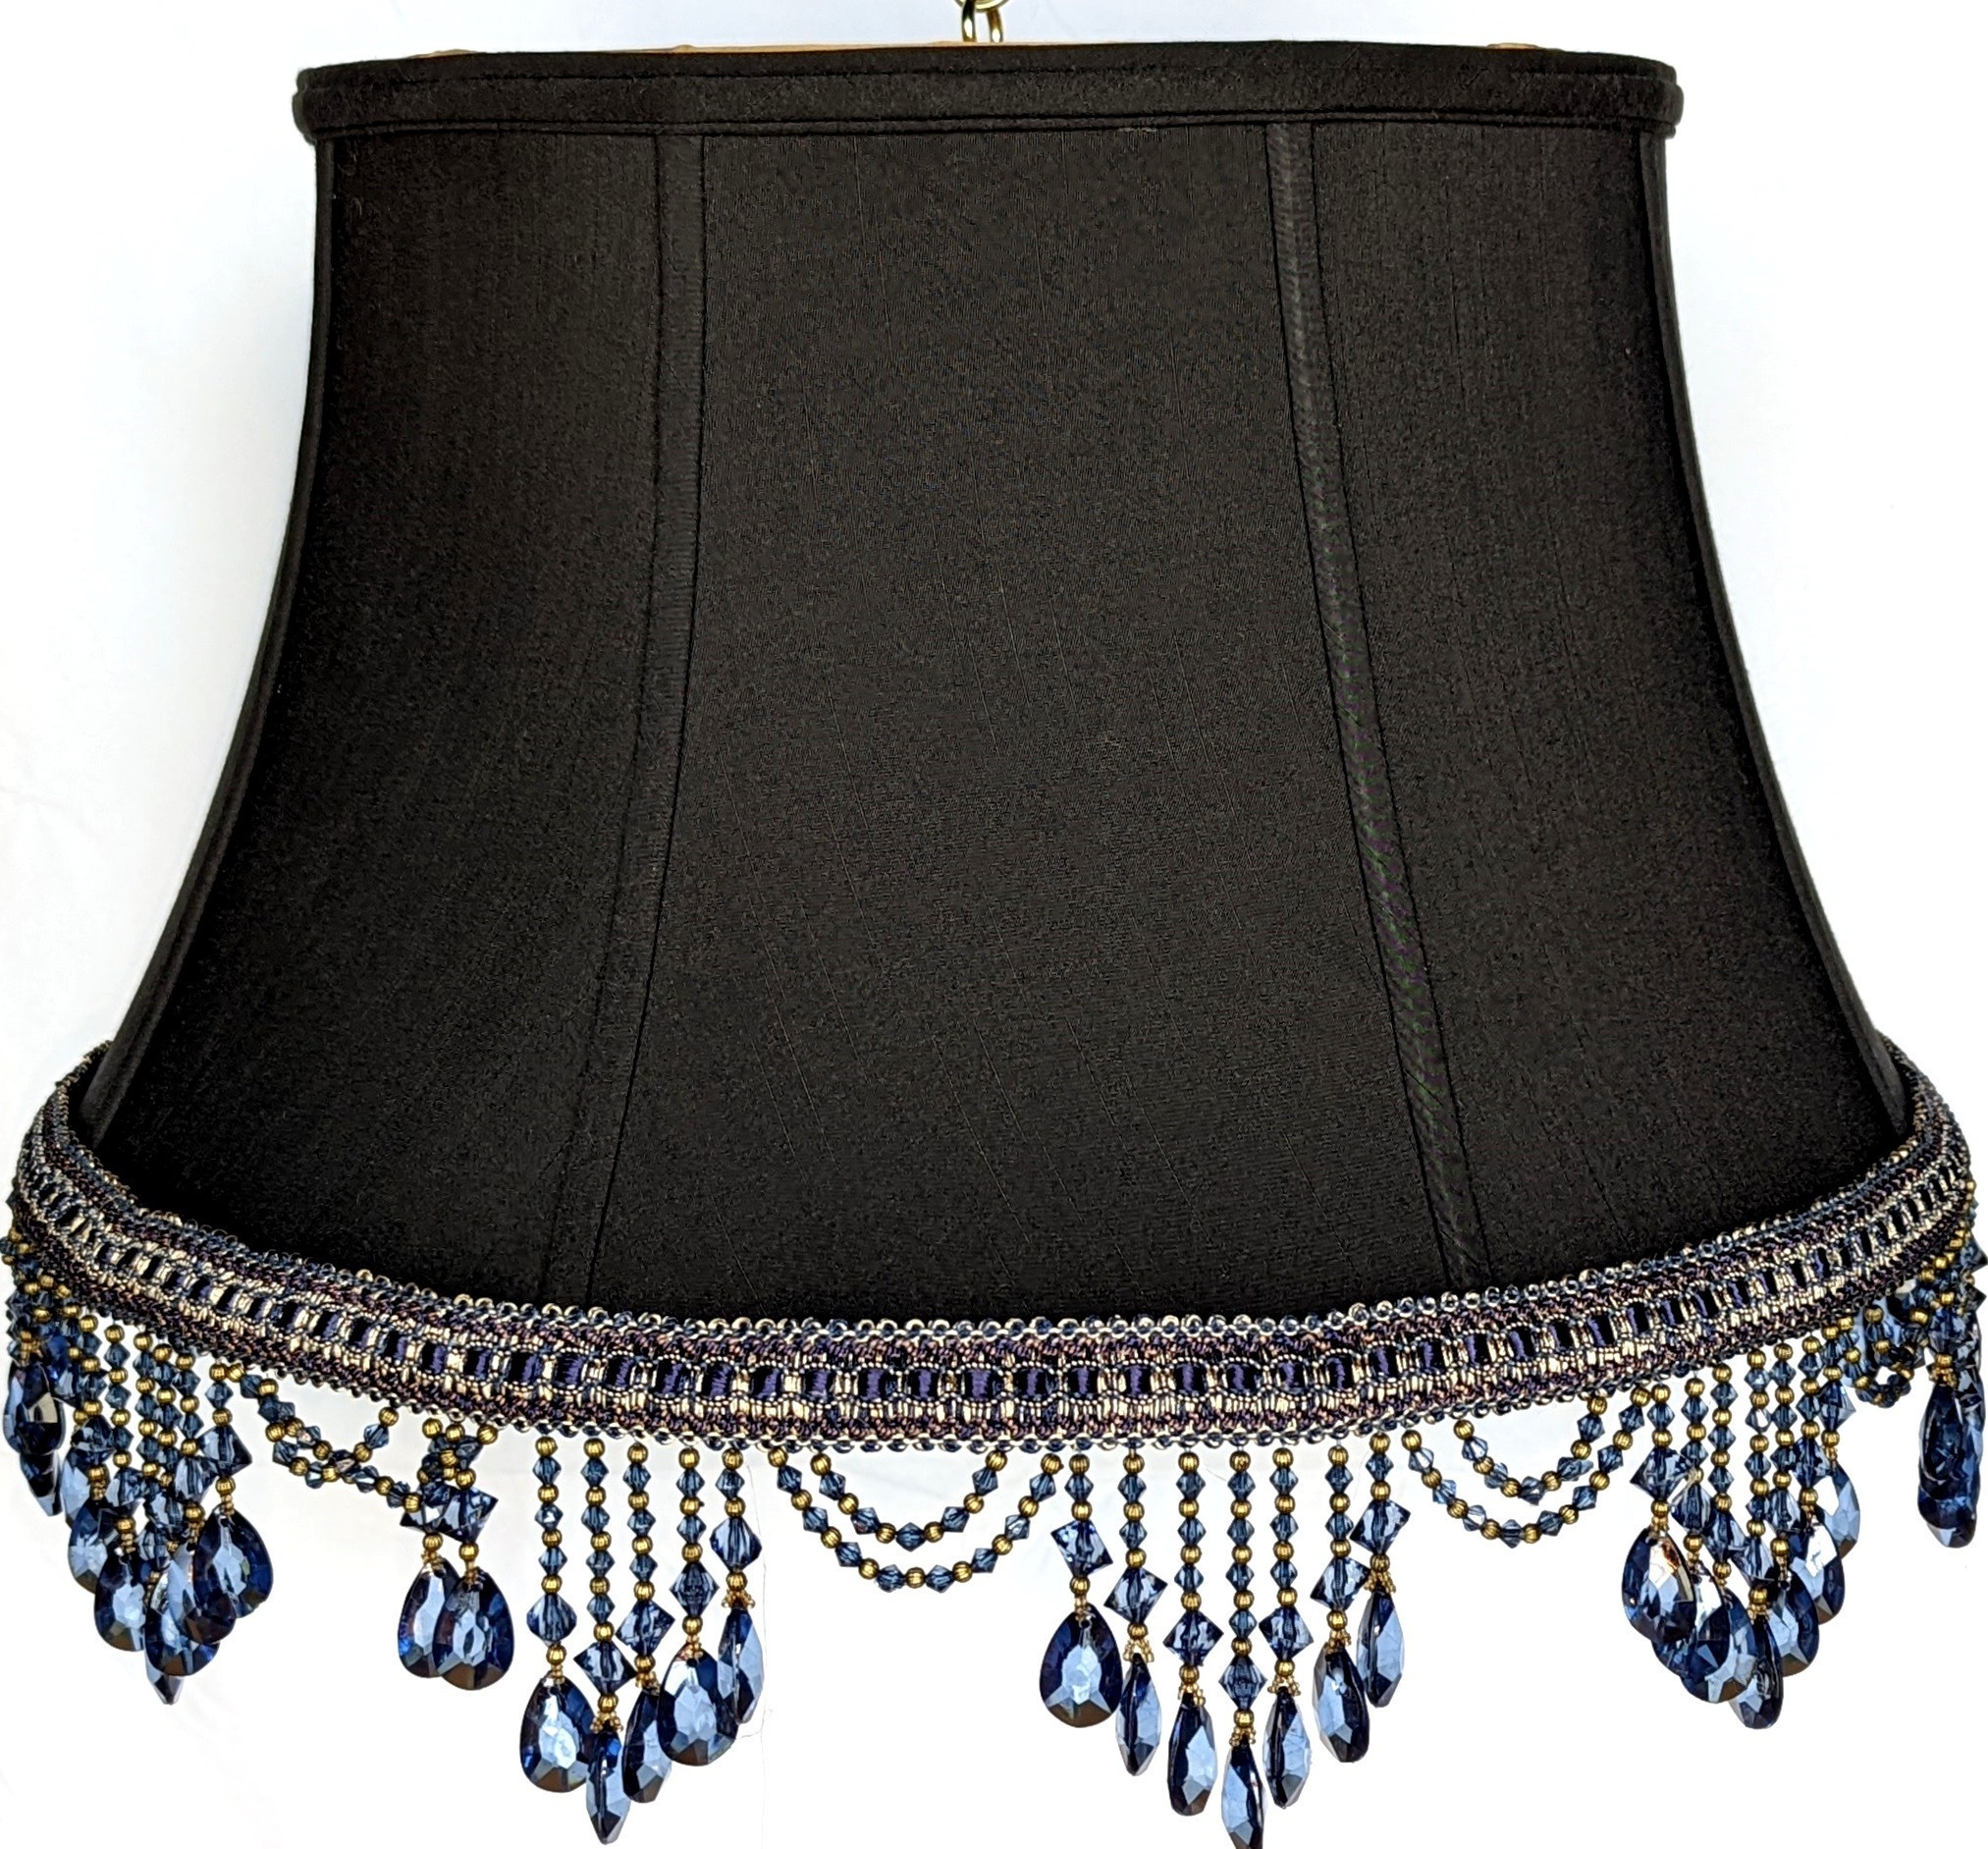 Black 6 Way Floor Lamp Shade with Beaded Fringes 17-19"W